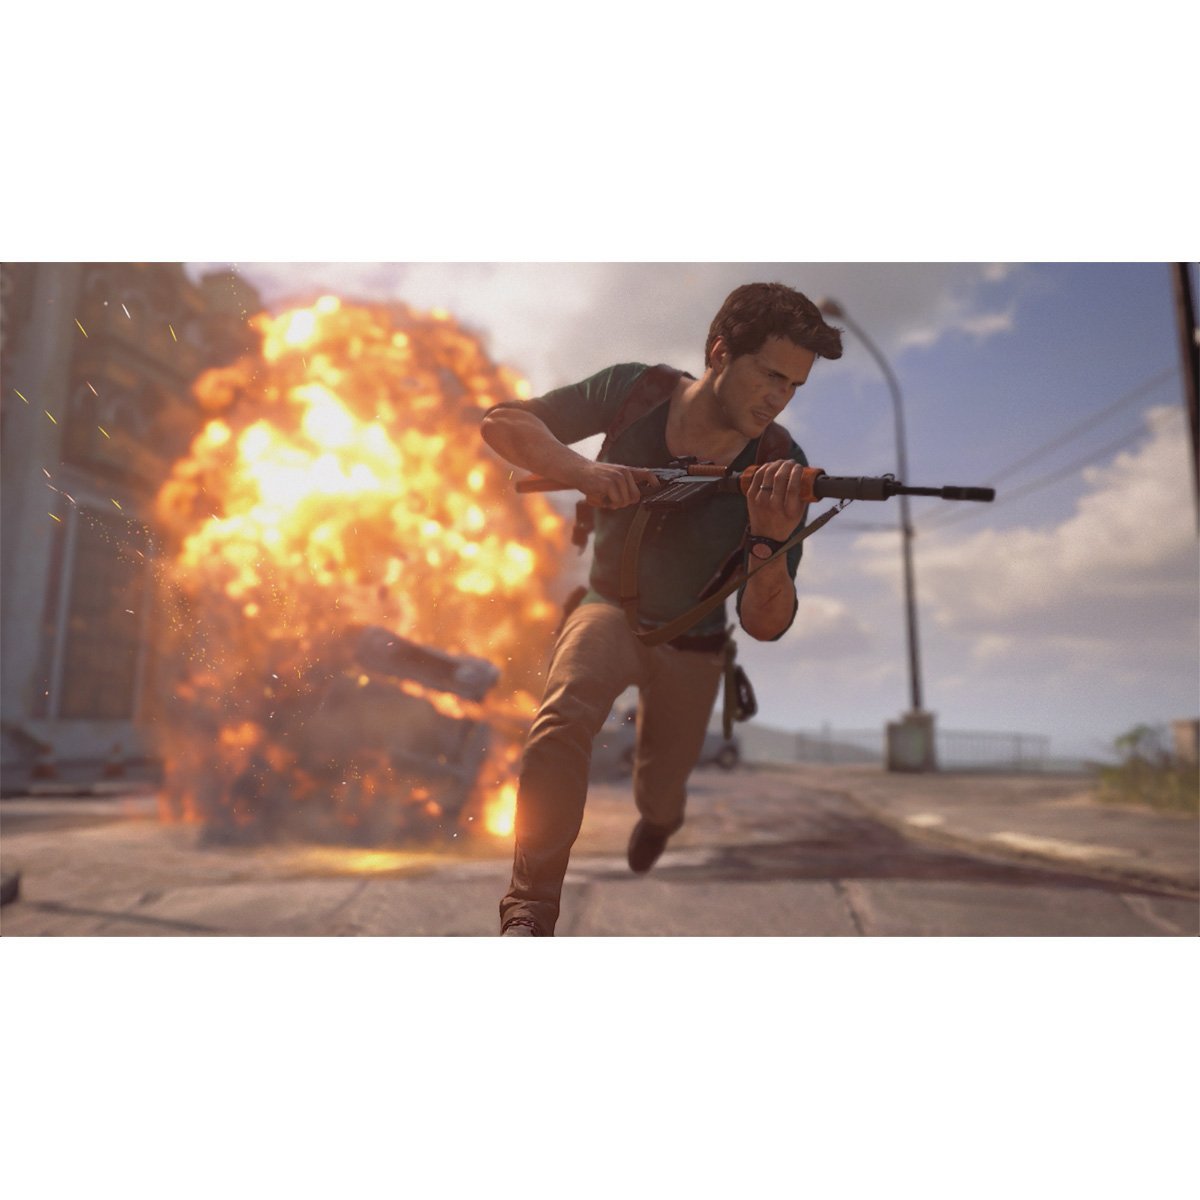 Ps4 Uncharted 4 a Thief´s End